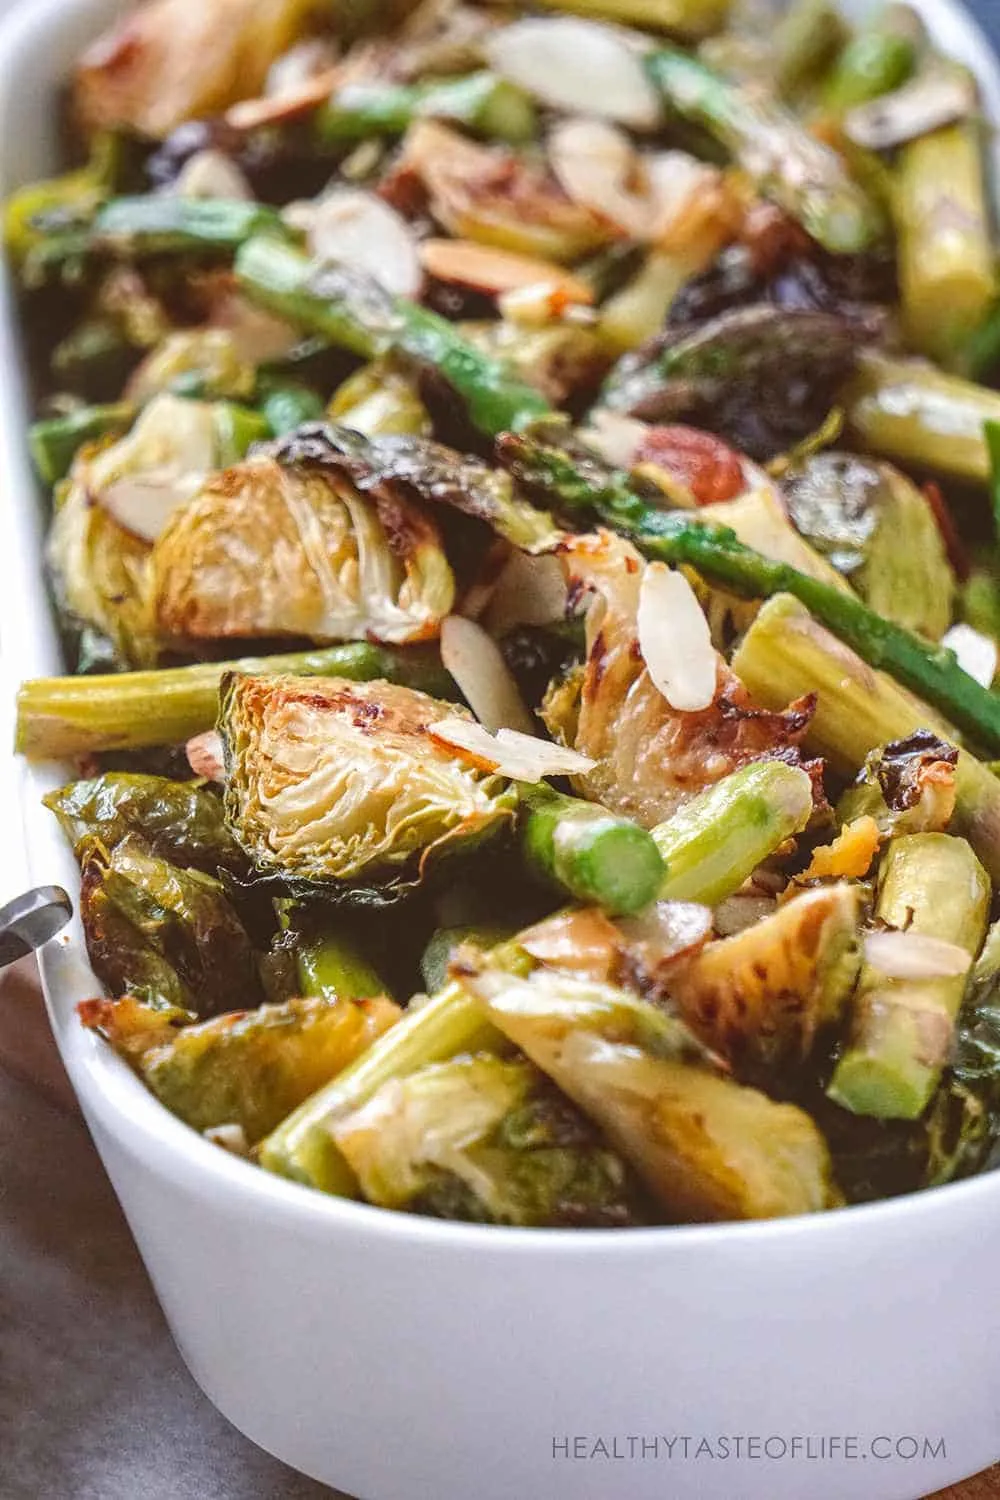 Crispy Brussels sprouts recipe roasted in the oven that yield wonderful toasty flavored Brussels sprouts combined with asparagus finished with a sweet Dijon mustard sauce. A simple healthy crispy Brussels sprouts recipe perfect as a special meal or side dish for Christmas dinner. Fresh or frozen Brussels sprouts they both will work! #roasted #crispy #easy #bruselsprouts #recipes